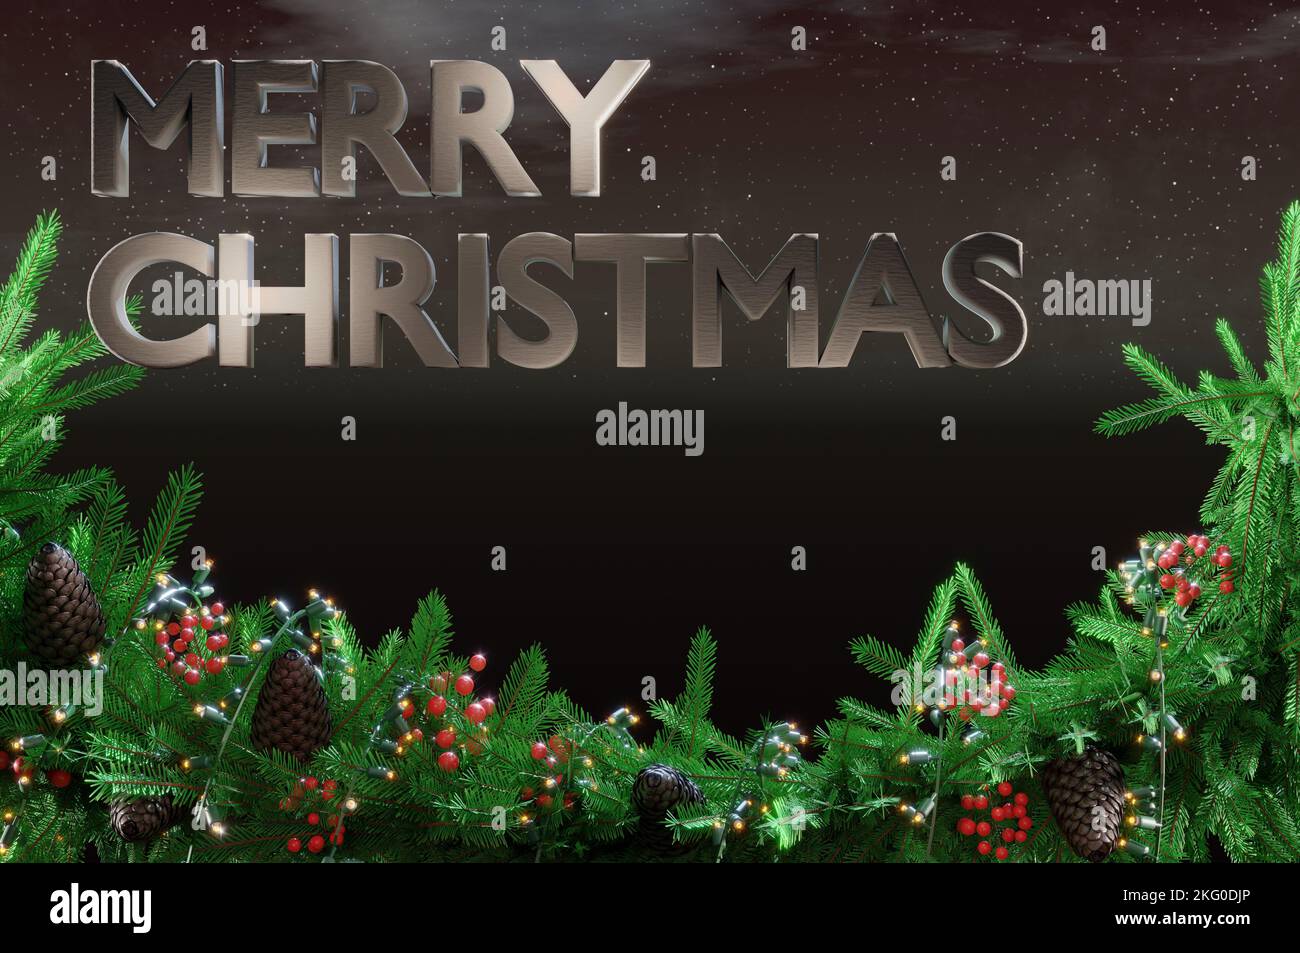 3D Illustration , 3d rendering . Happy Merry Christmas background on black sky . Stock Photo